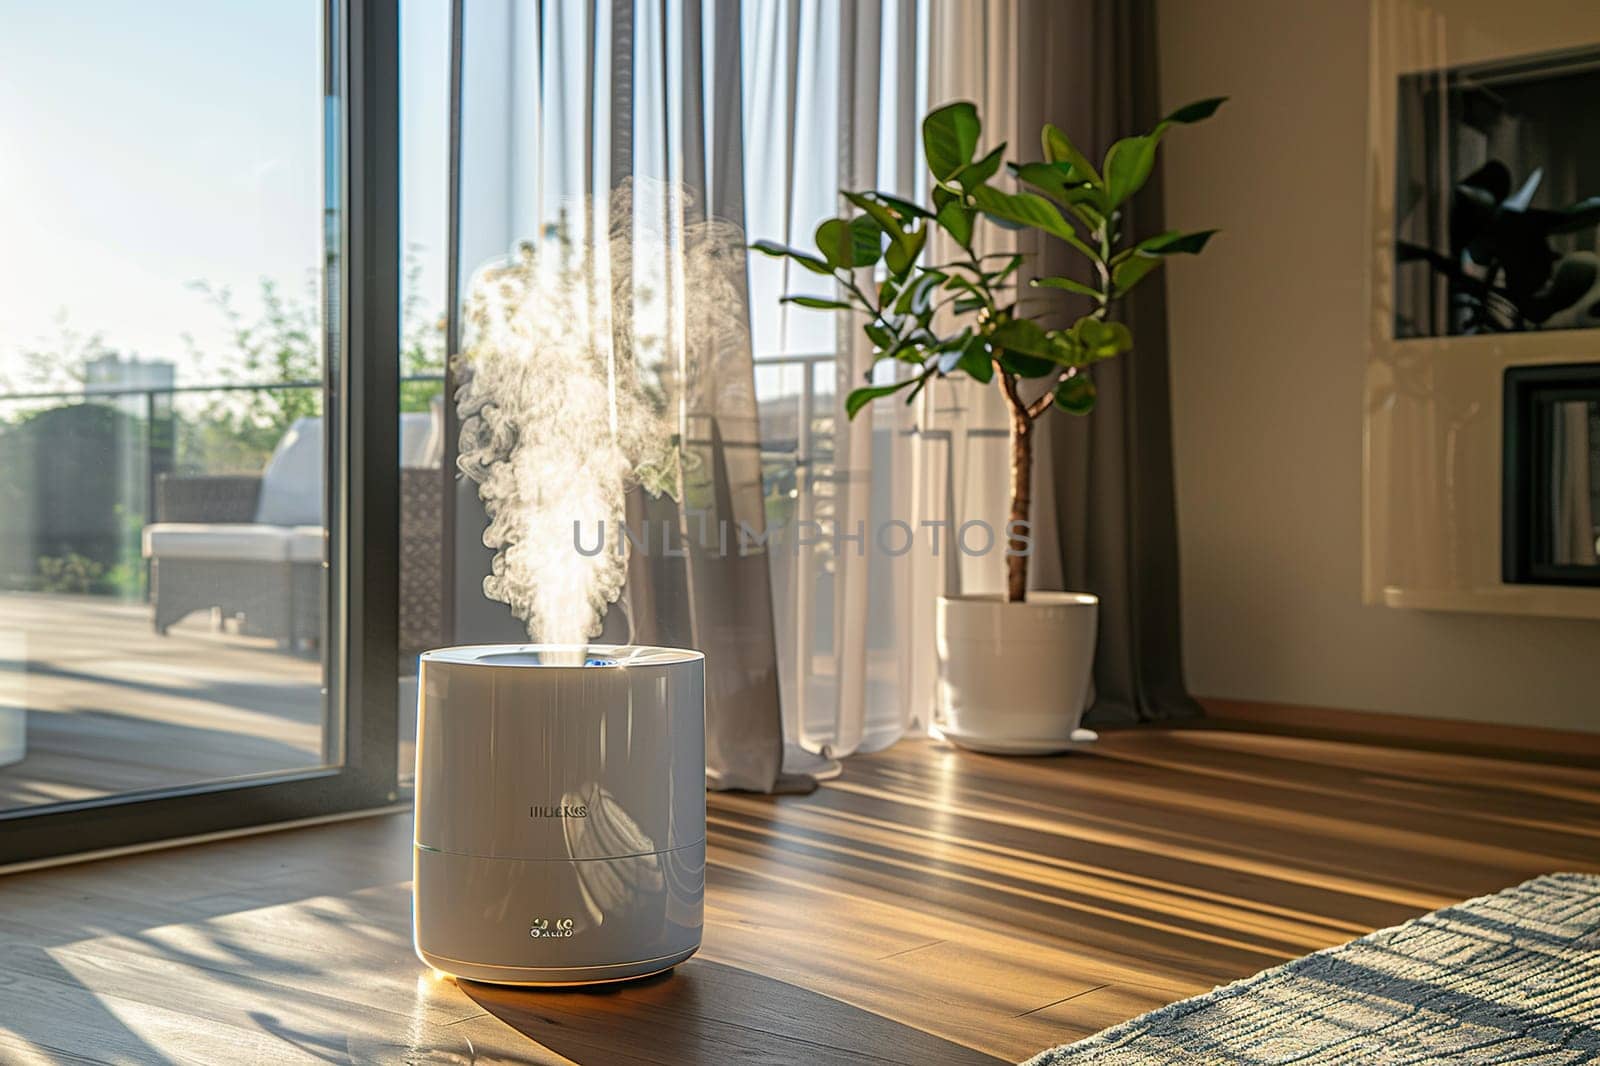 The humidifier works in the room in front of the window with a flower.